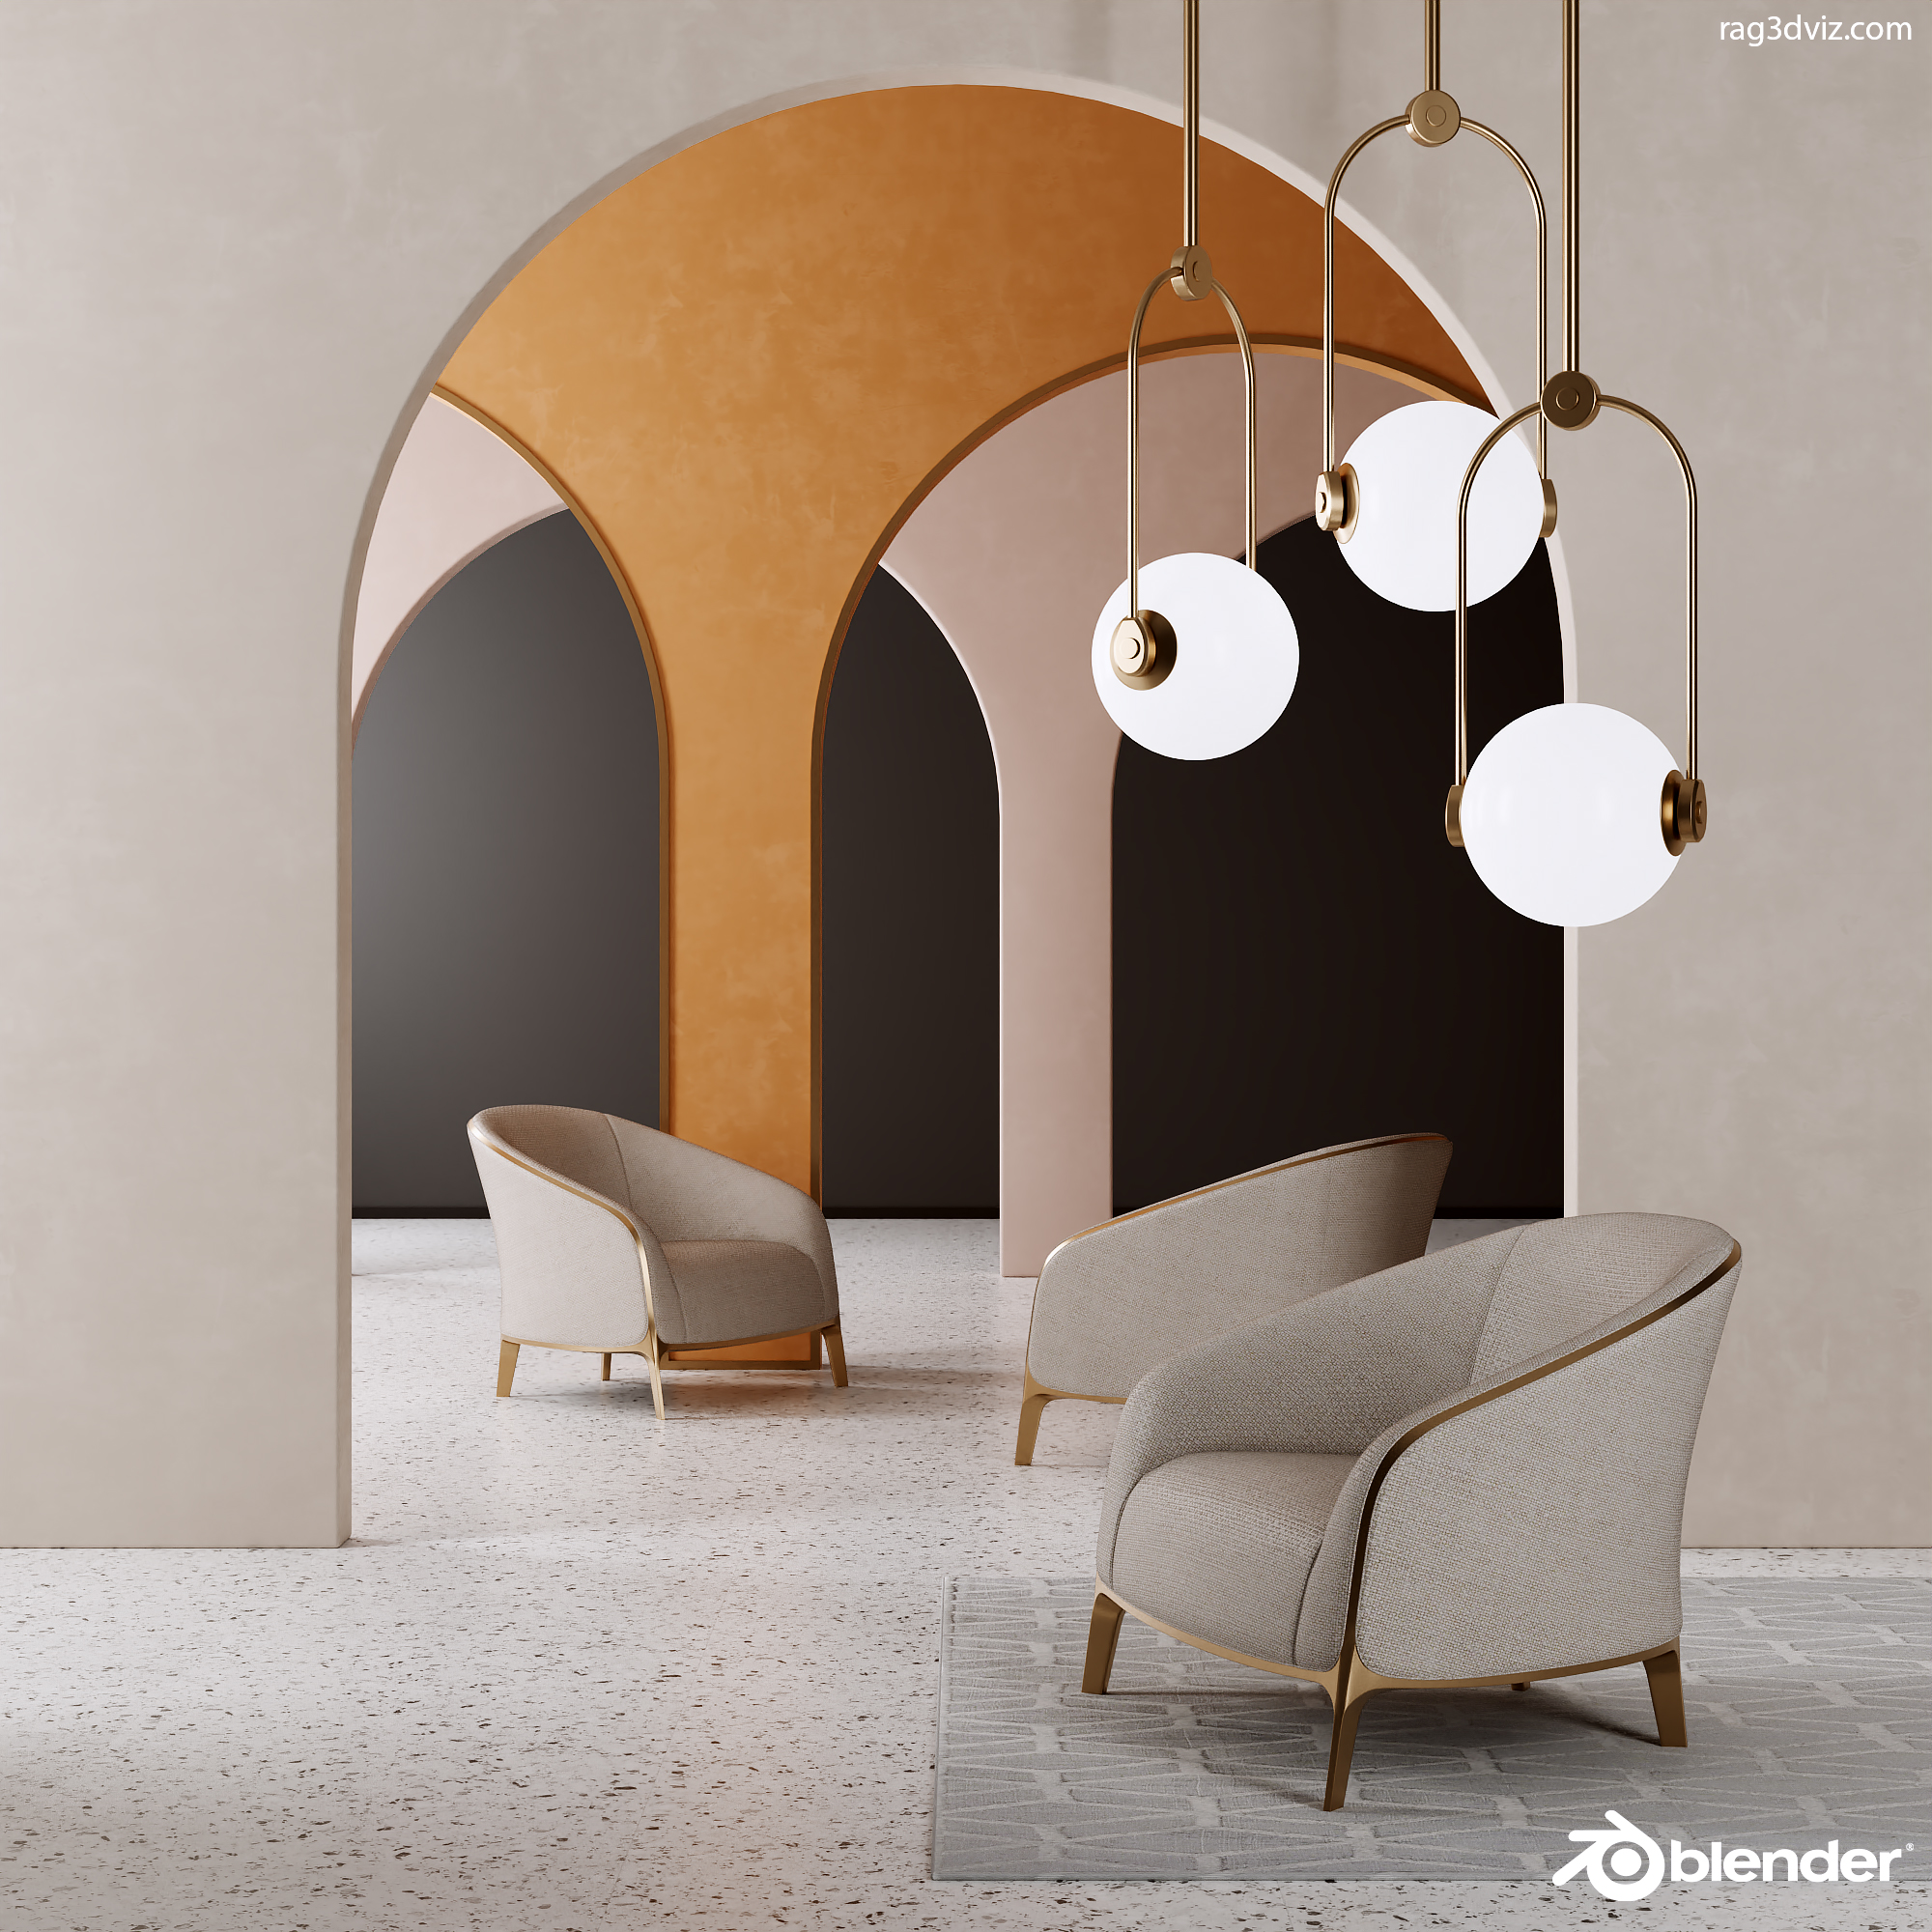 Free Photo realistic Interior Lighting in Blender 2.8 Cycles – Real Time 3D Architecture Visualization